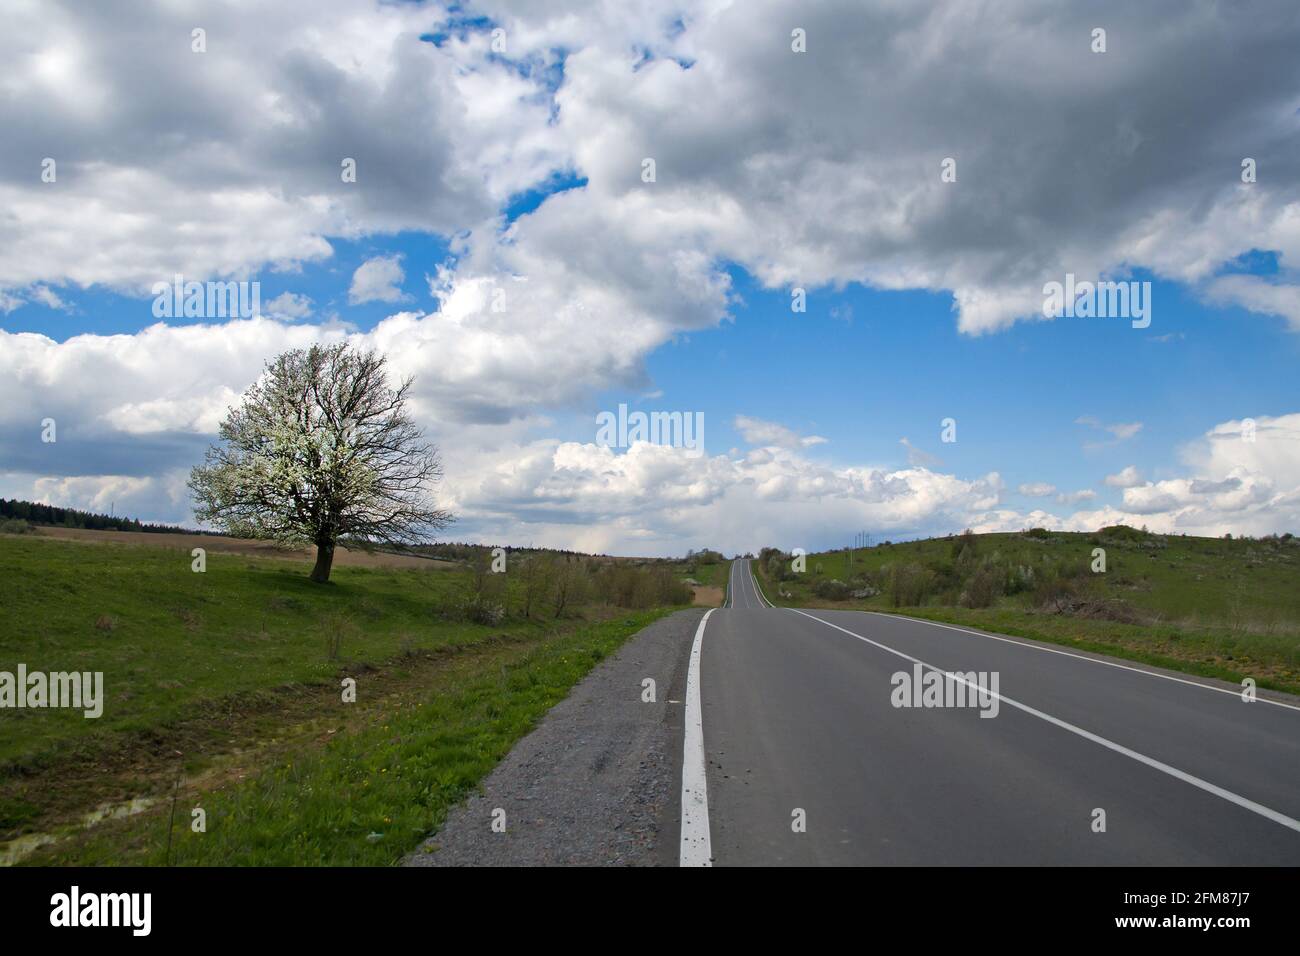 A single tree  standing on a road and field. It is a beautiful day in spring and the branches of the tree stand out against the cloudy sky. Stock Photo